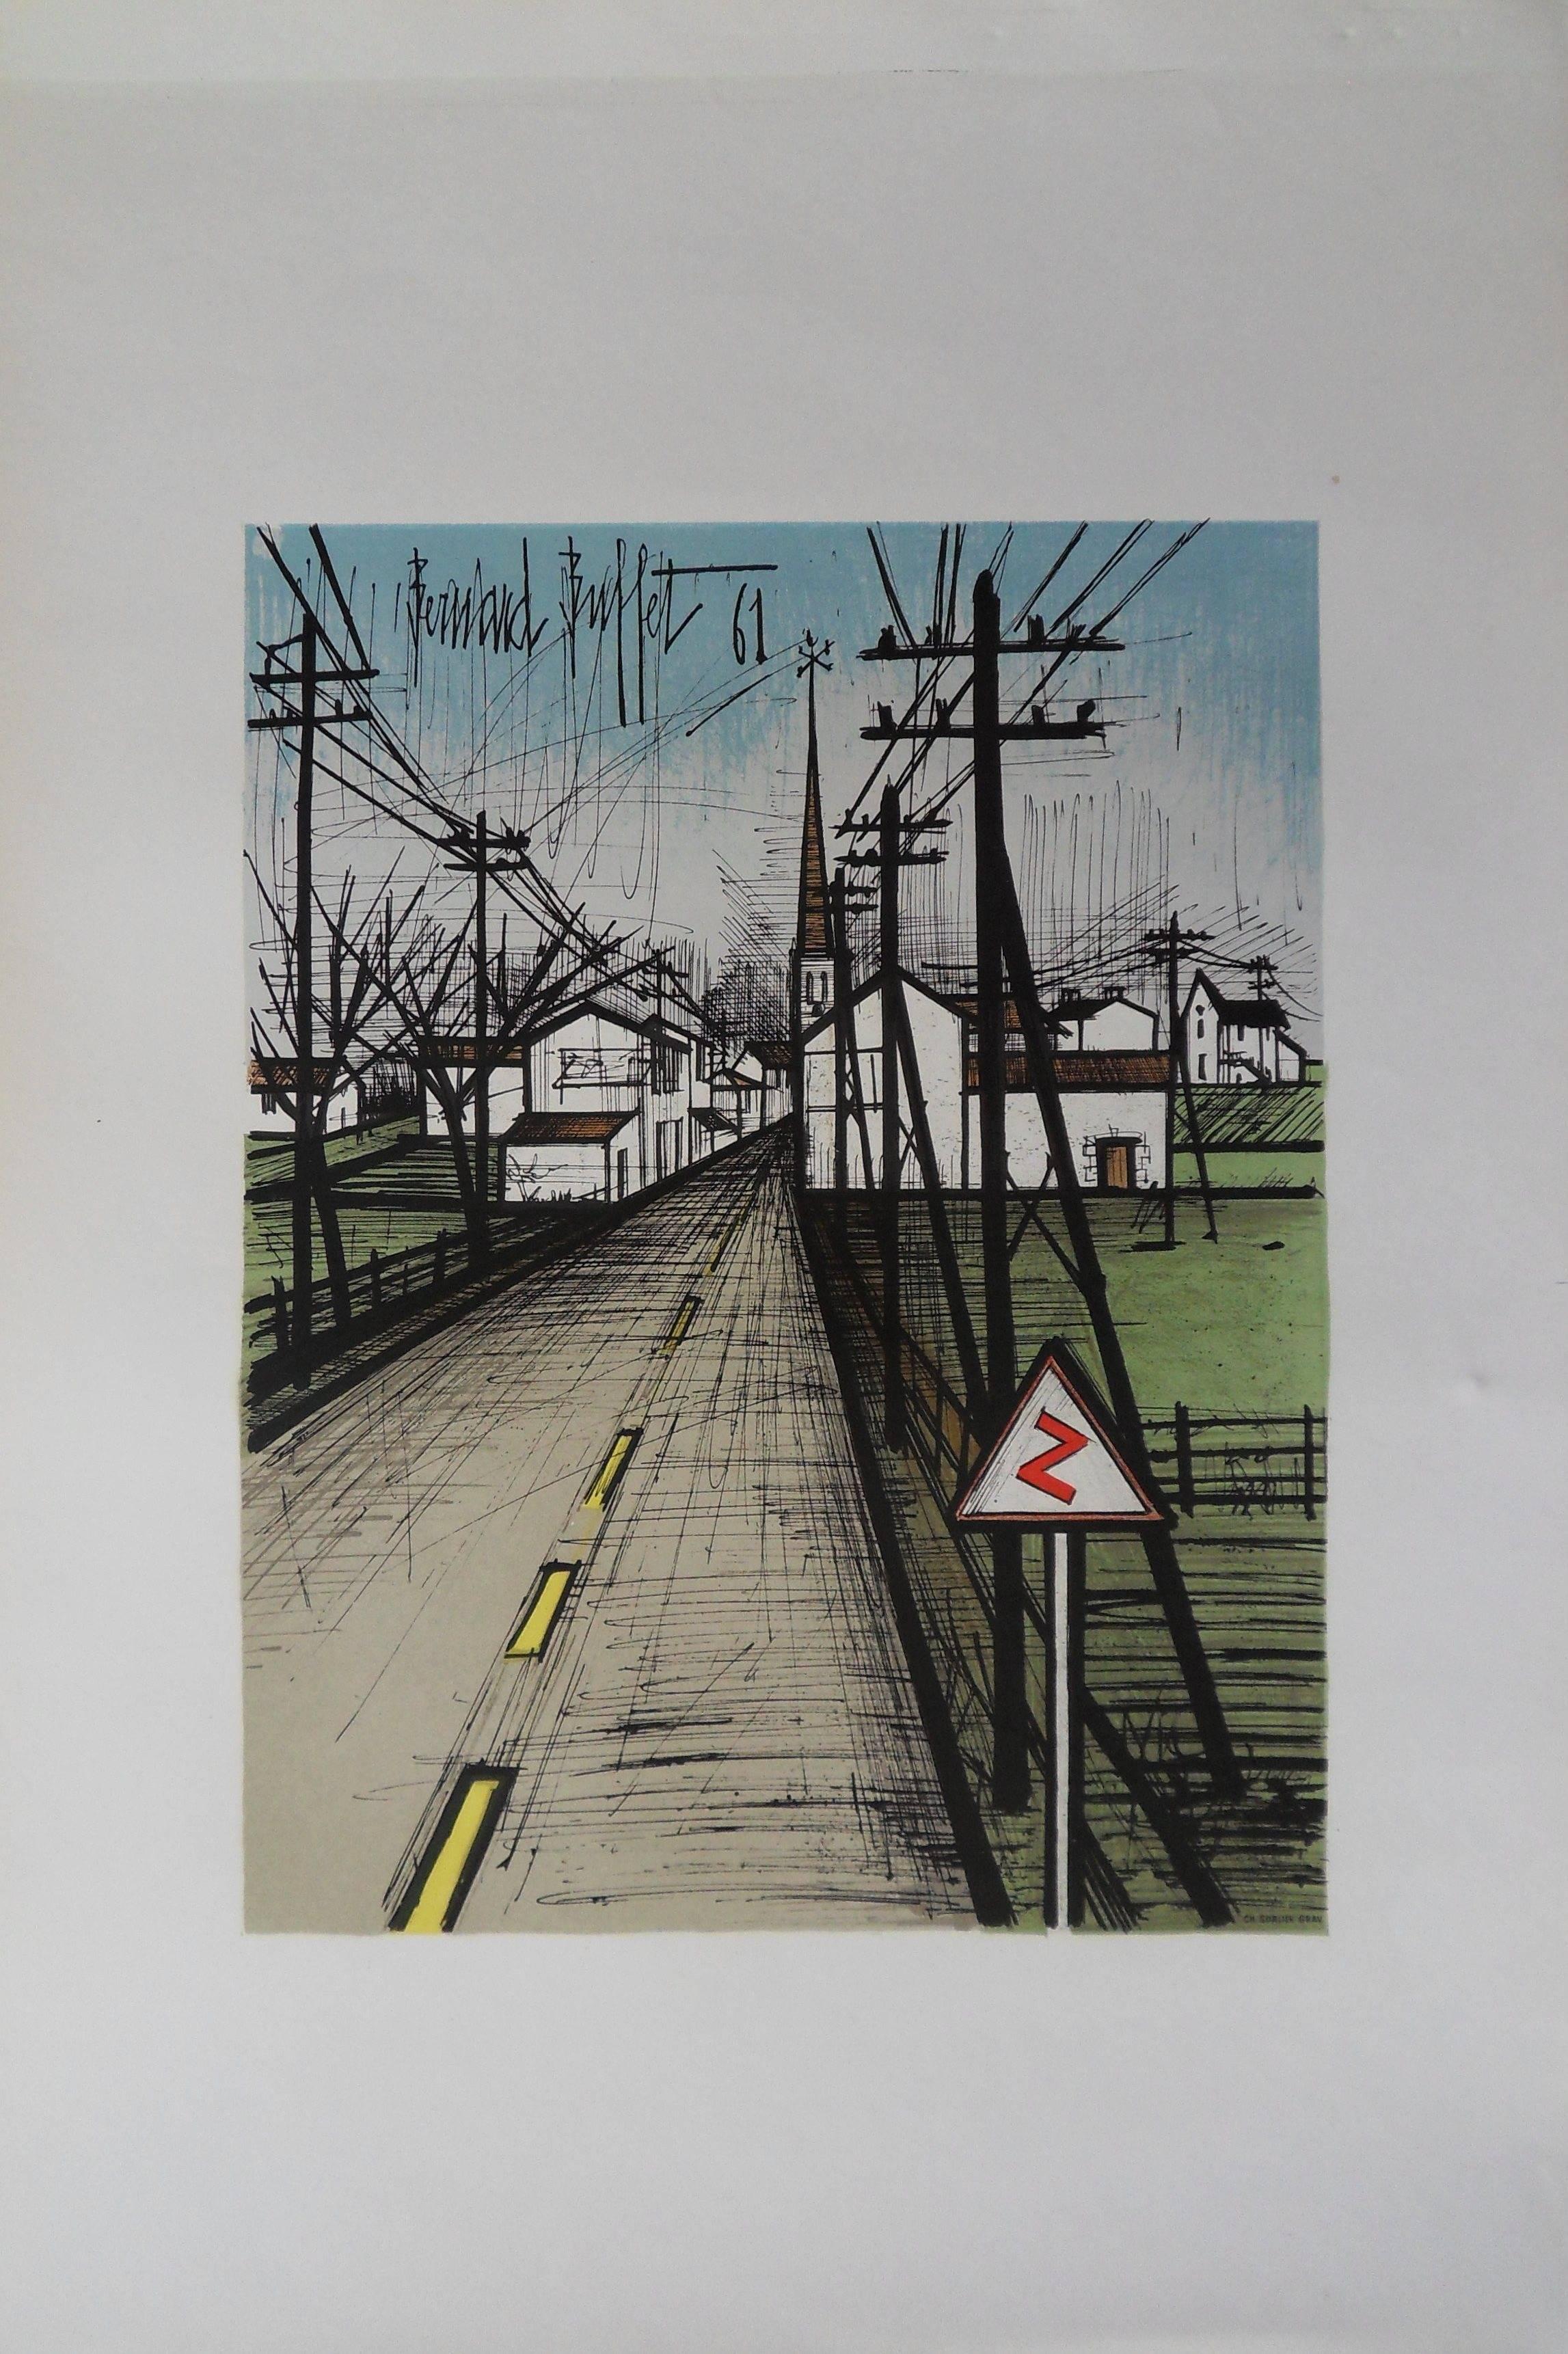 Bernard BUFFET
The road, 1962

Original lithograph in colors (Mourlot workshop)
Printed signature in the plate
On paper 23 x 16 inch

REFRENCES : Catalogue raisonne Bernard Buffet Lithographe vol 1, reference #305

Excellent condition